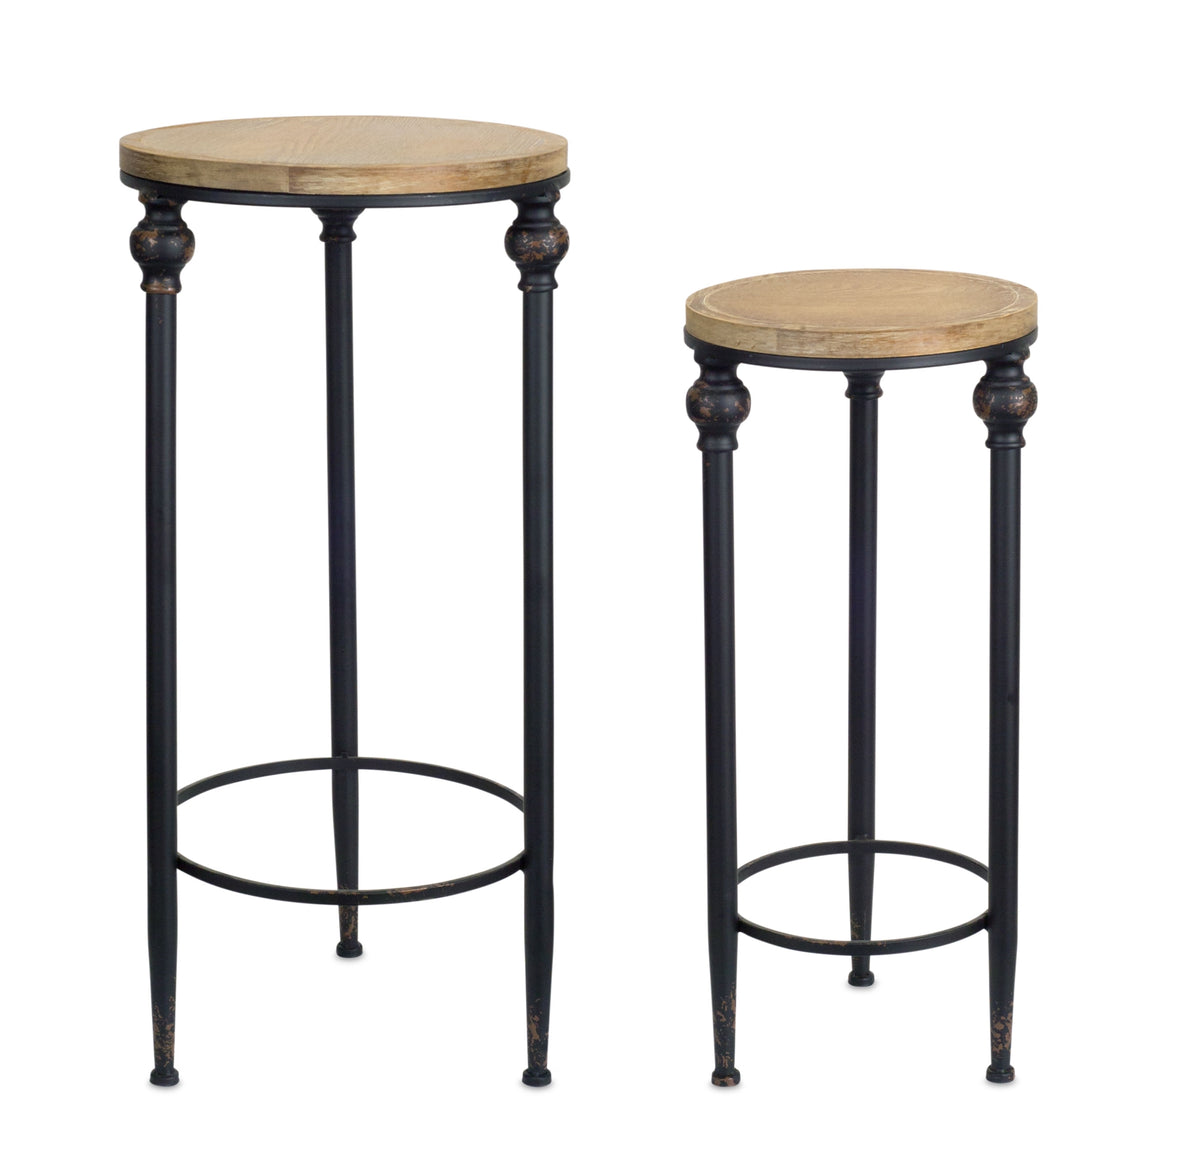 Set of 2 Plant Stands, Side Tables